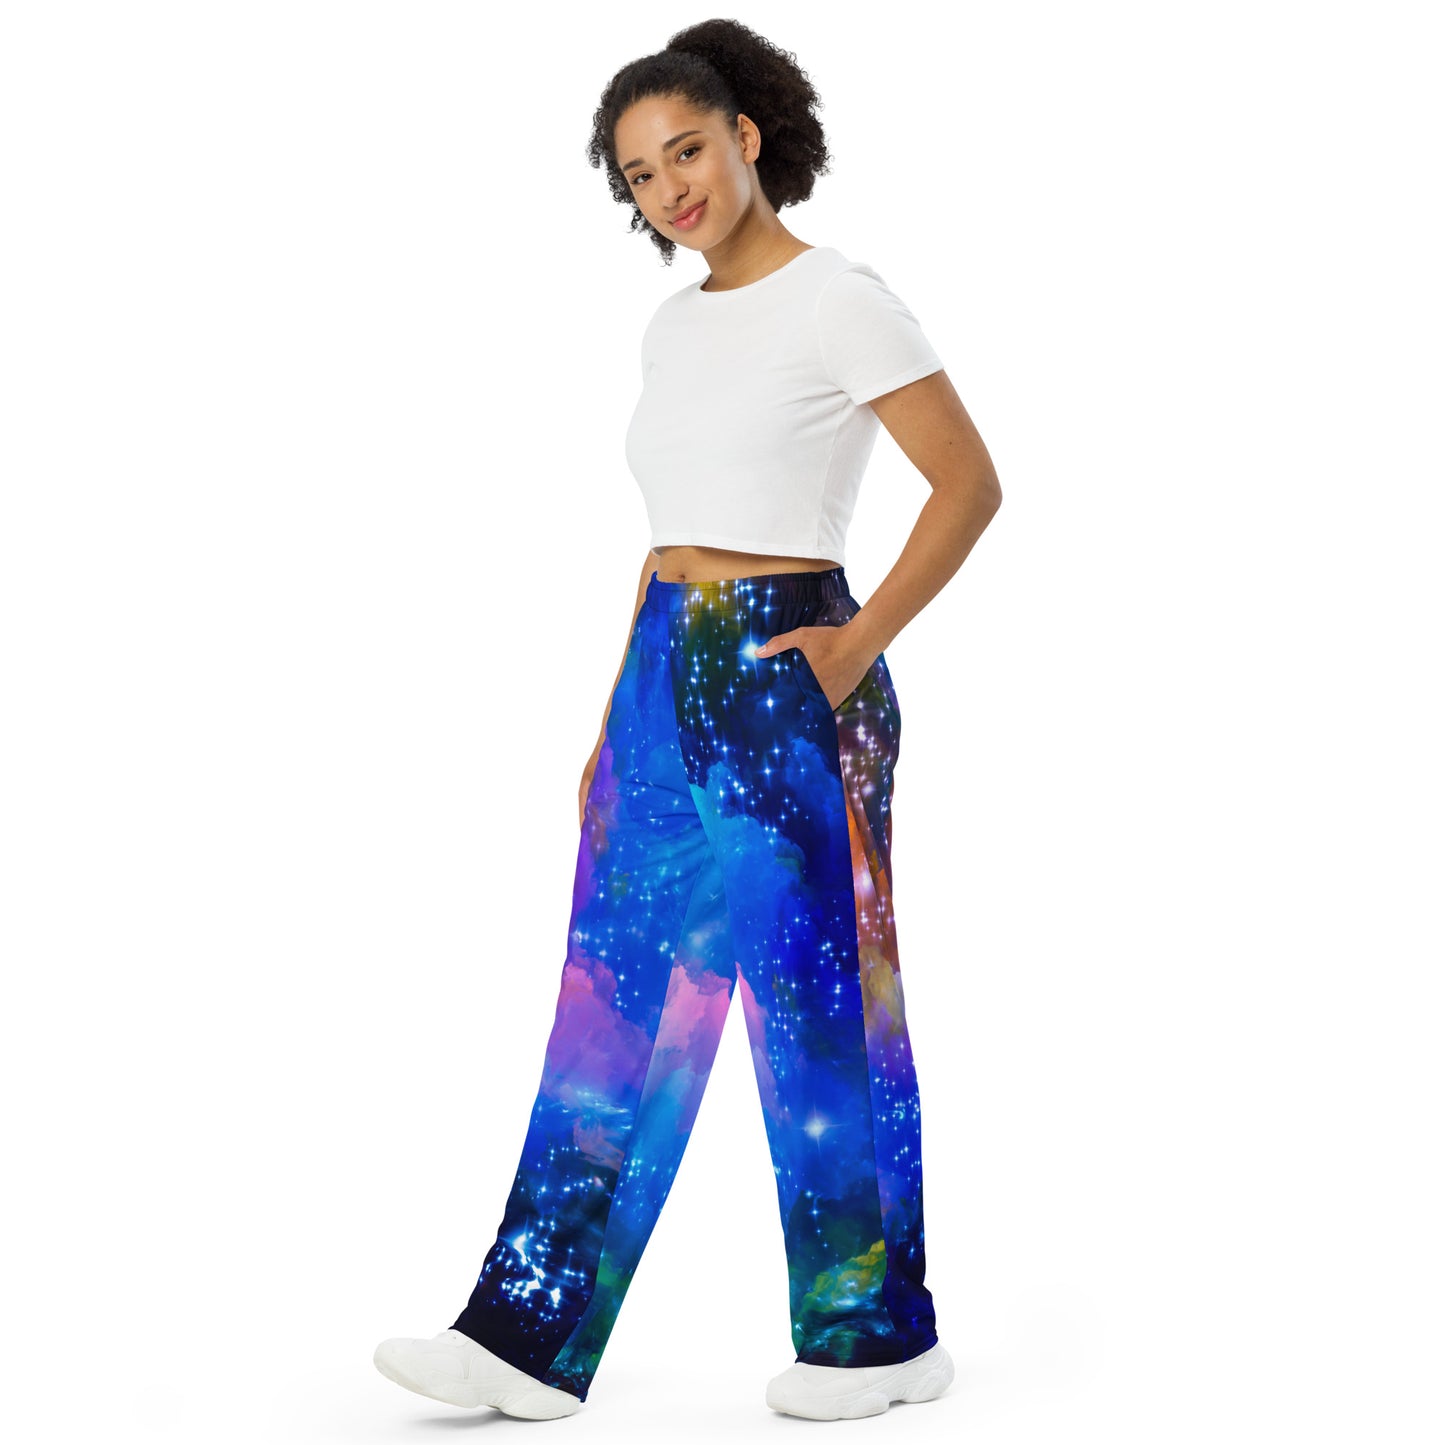 All-over space print unisex wide-leg pants